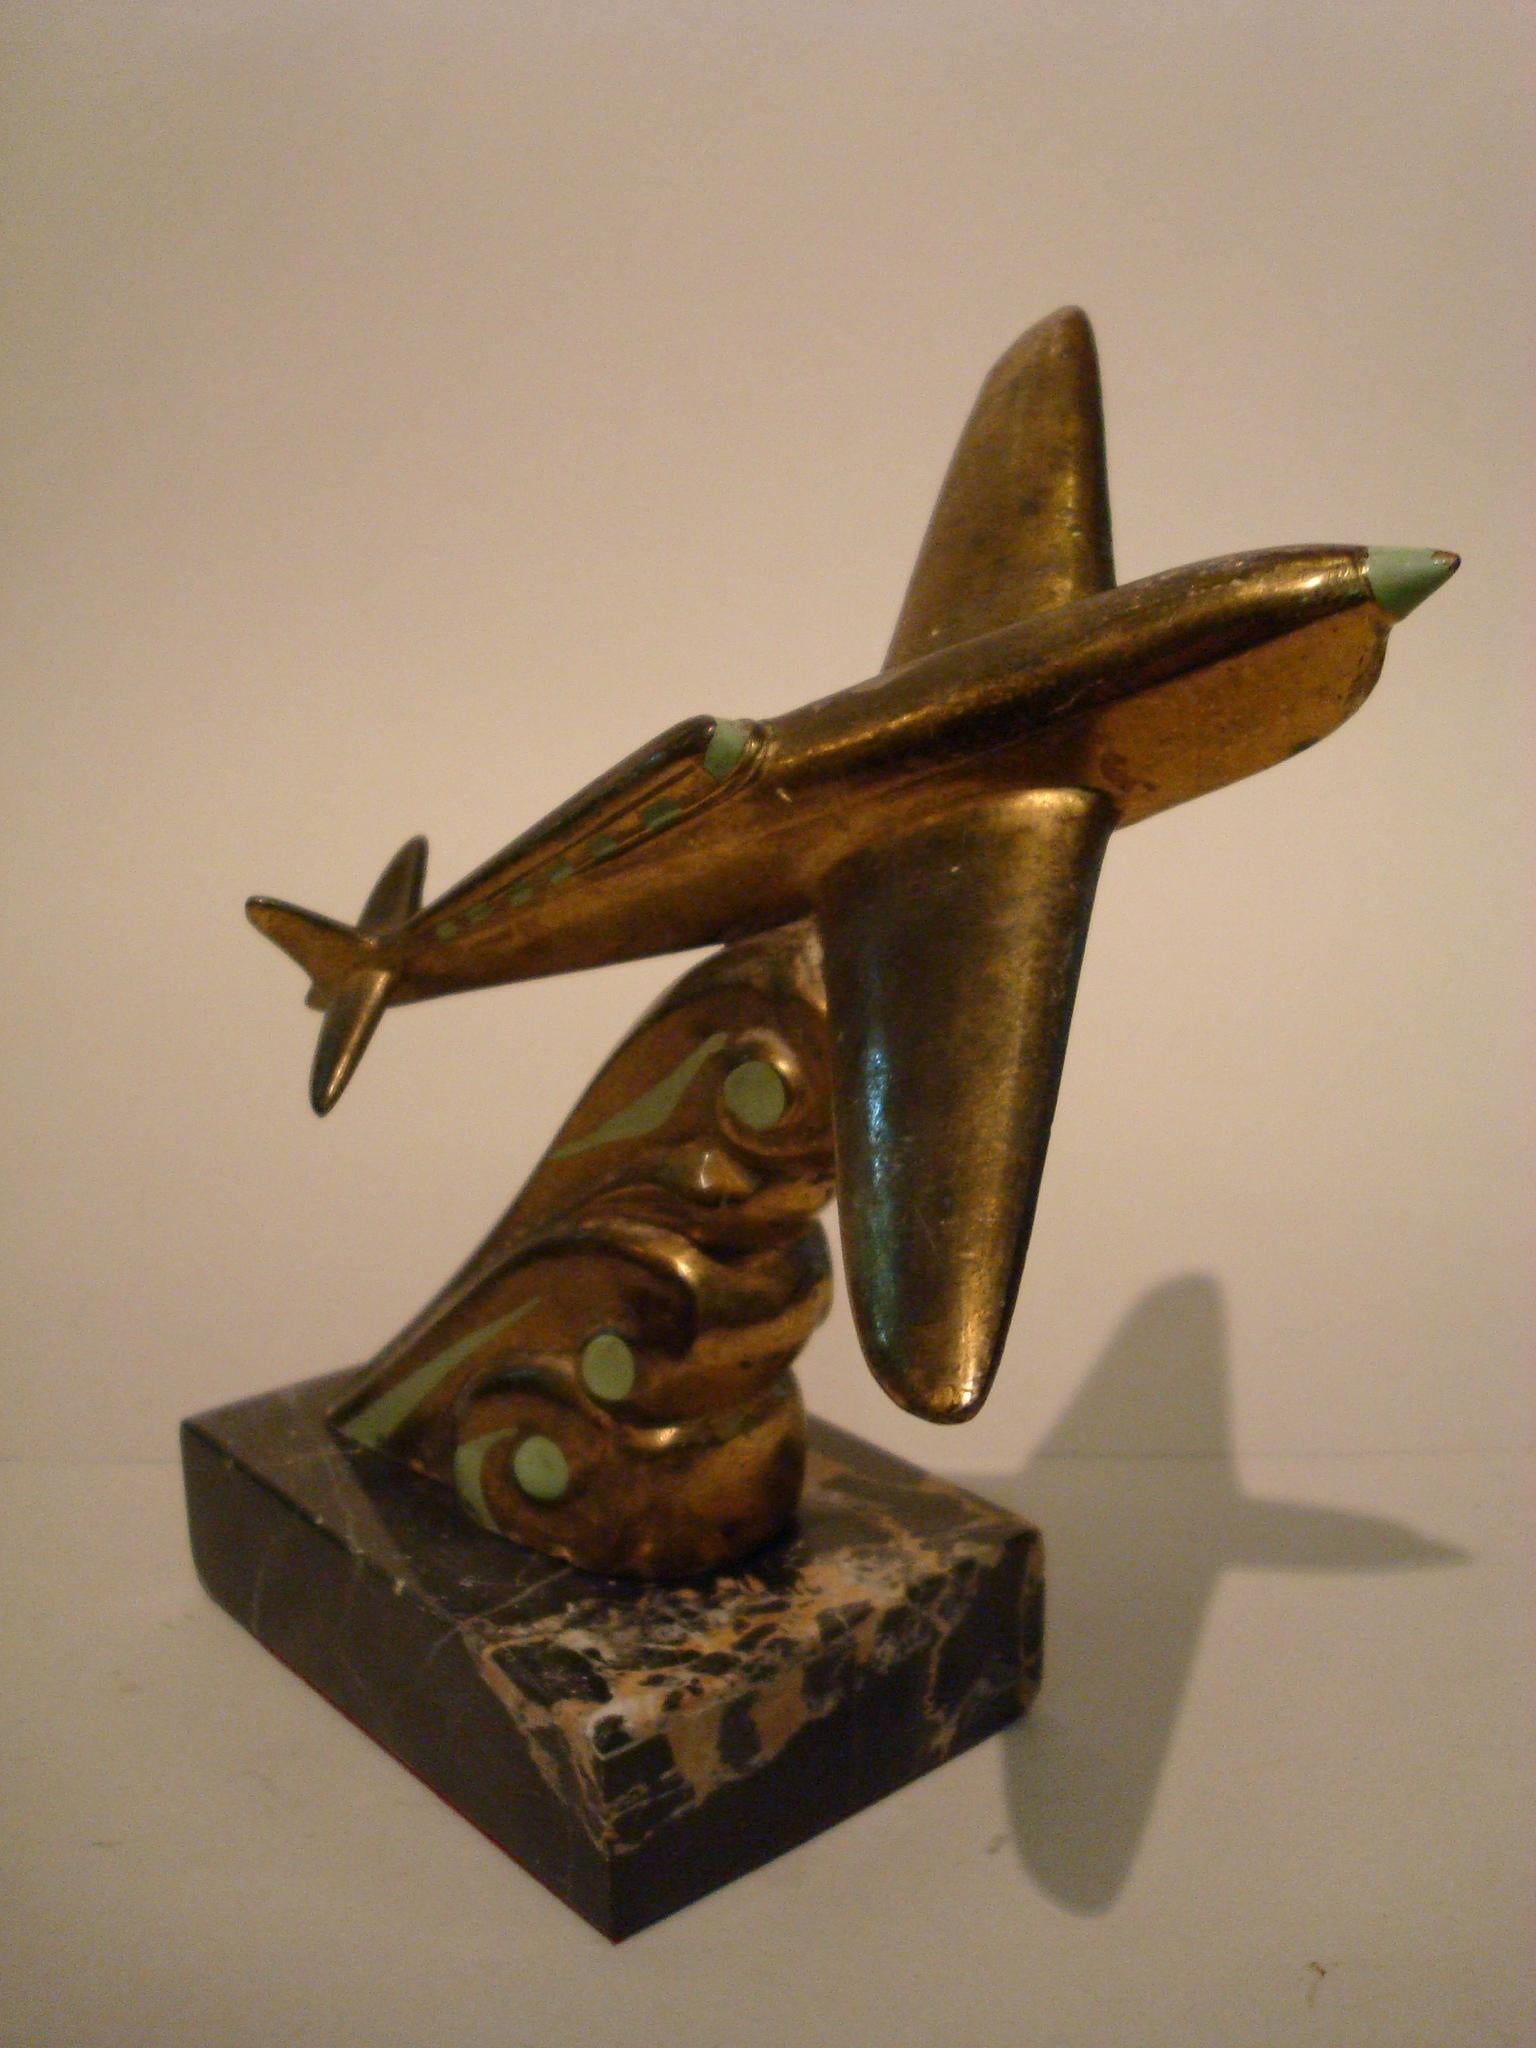 Art Deco French airplane desk paperweight sculpture.
Airplane has original paint, some wear that you can see on the pictures.
It´s a rare model. It has a moderniste, Art Deco style.
Mounted over a black portoro marble base.